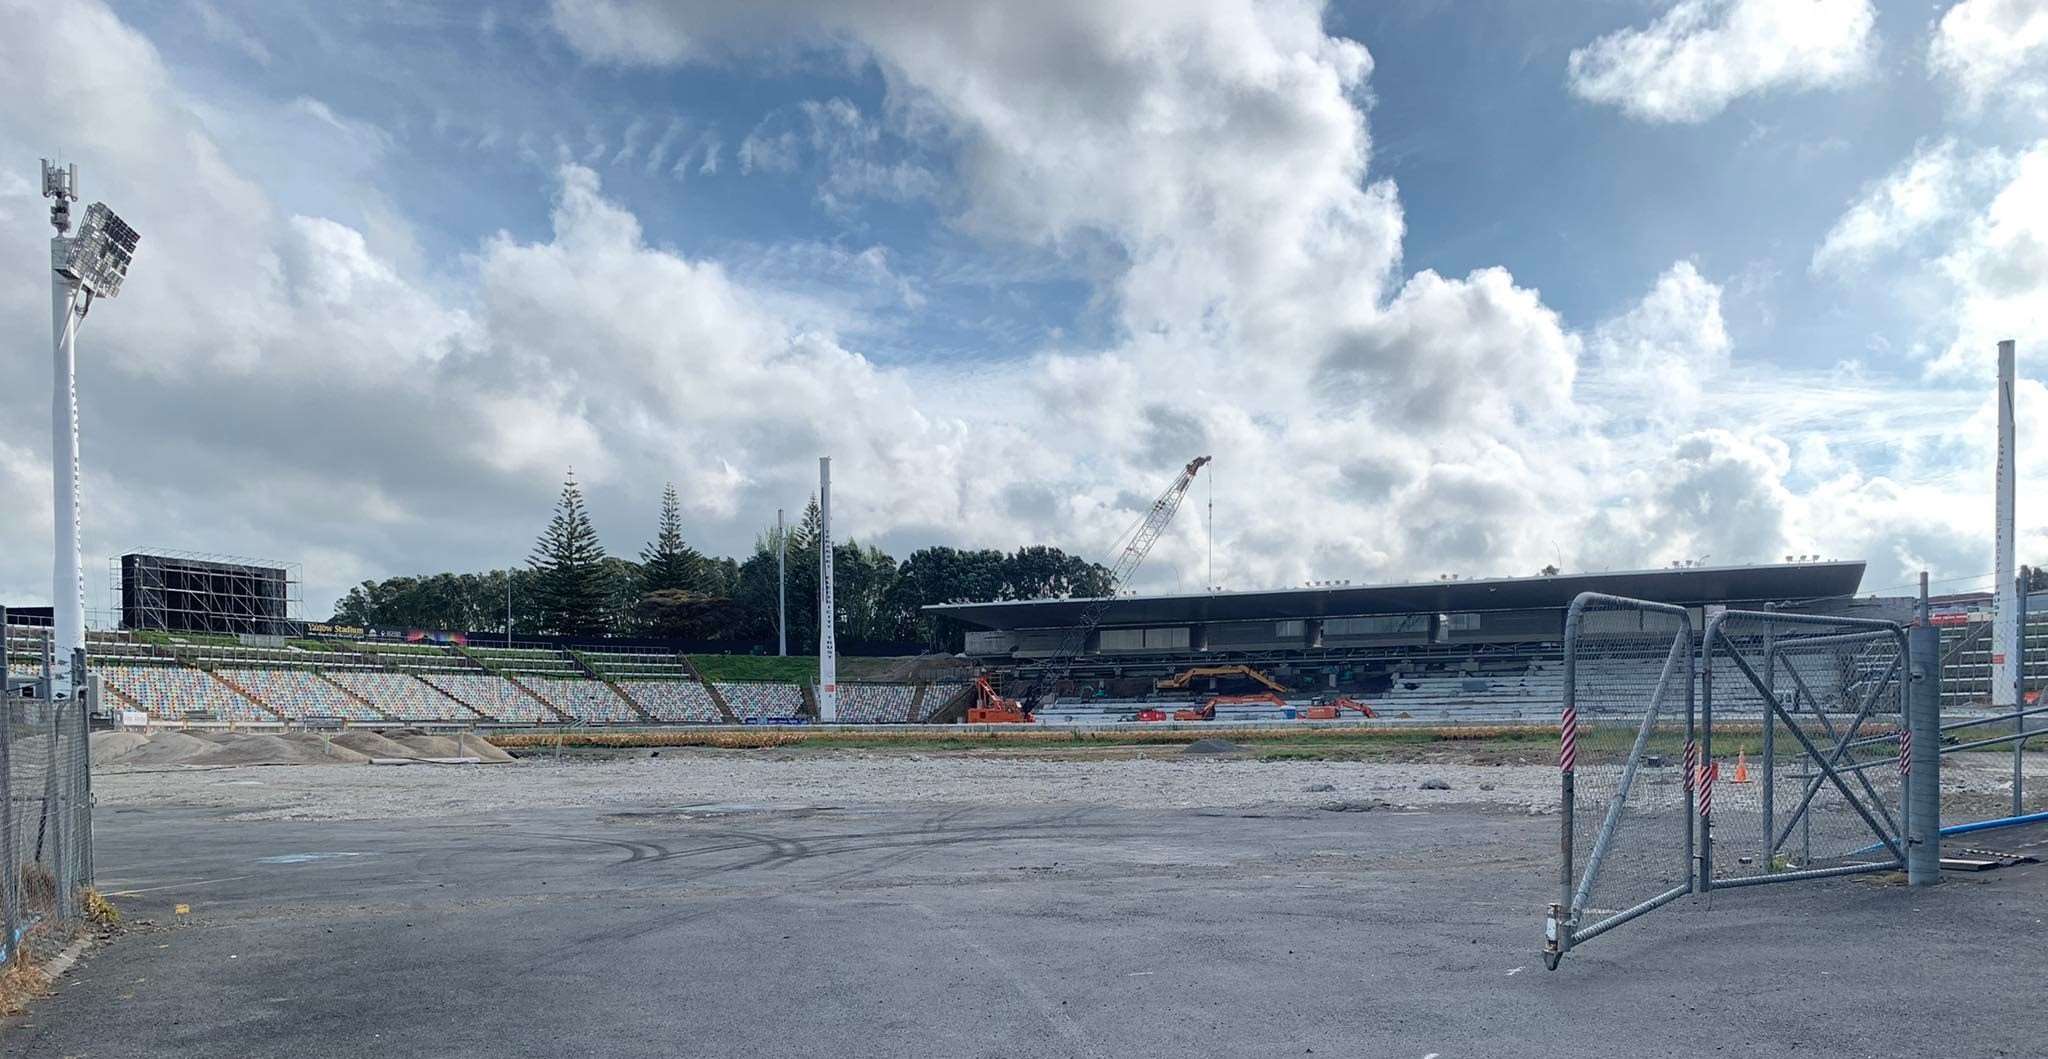 West stand bleaches back before Christmas, project on budget